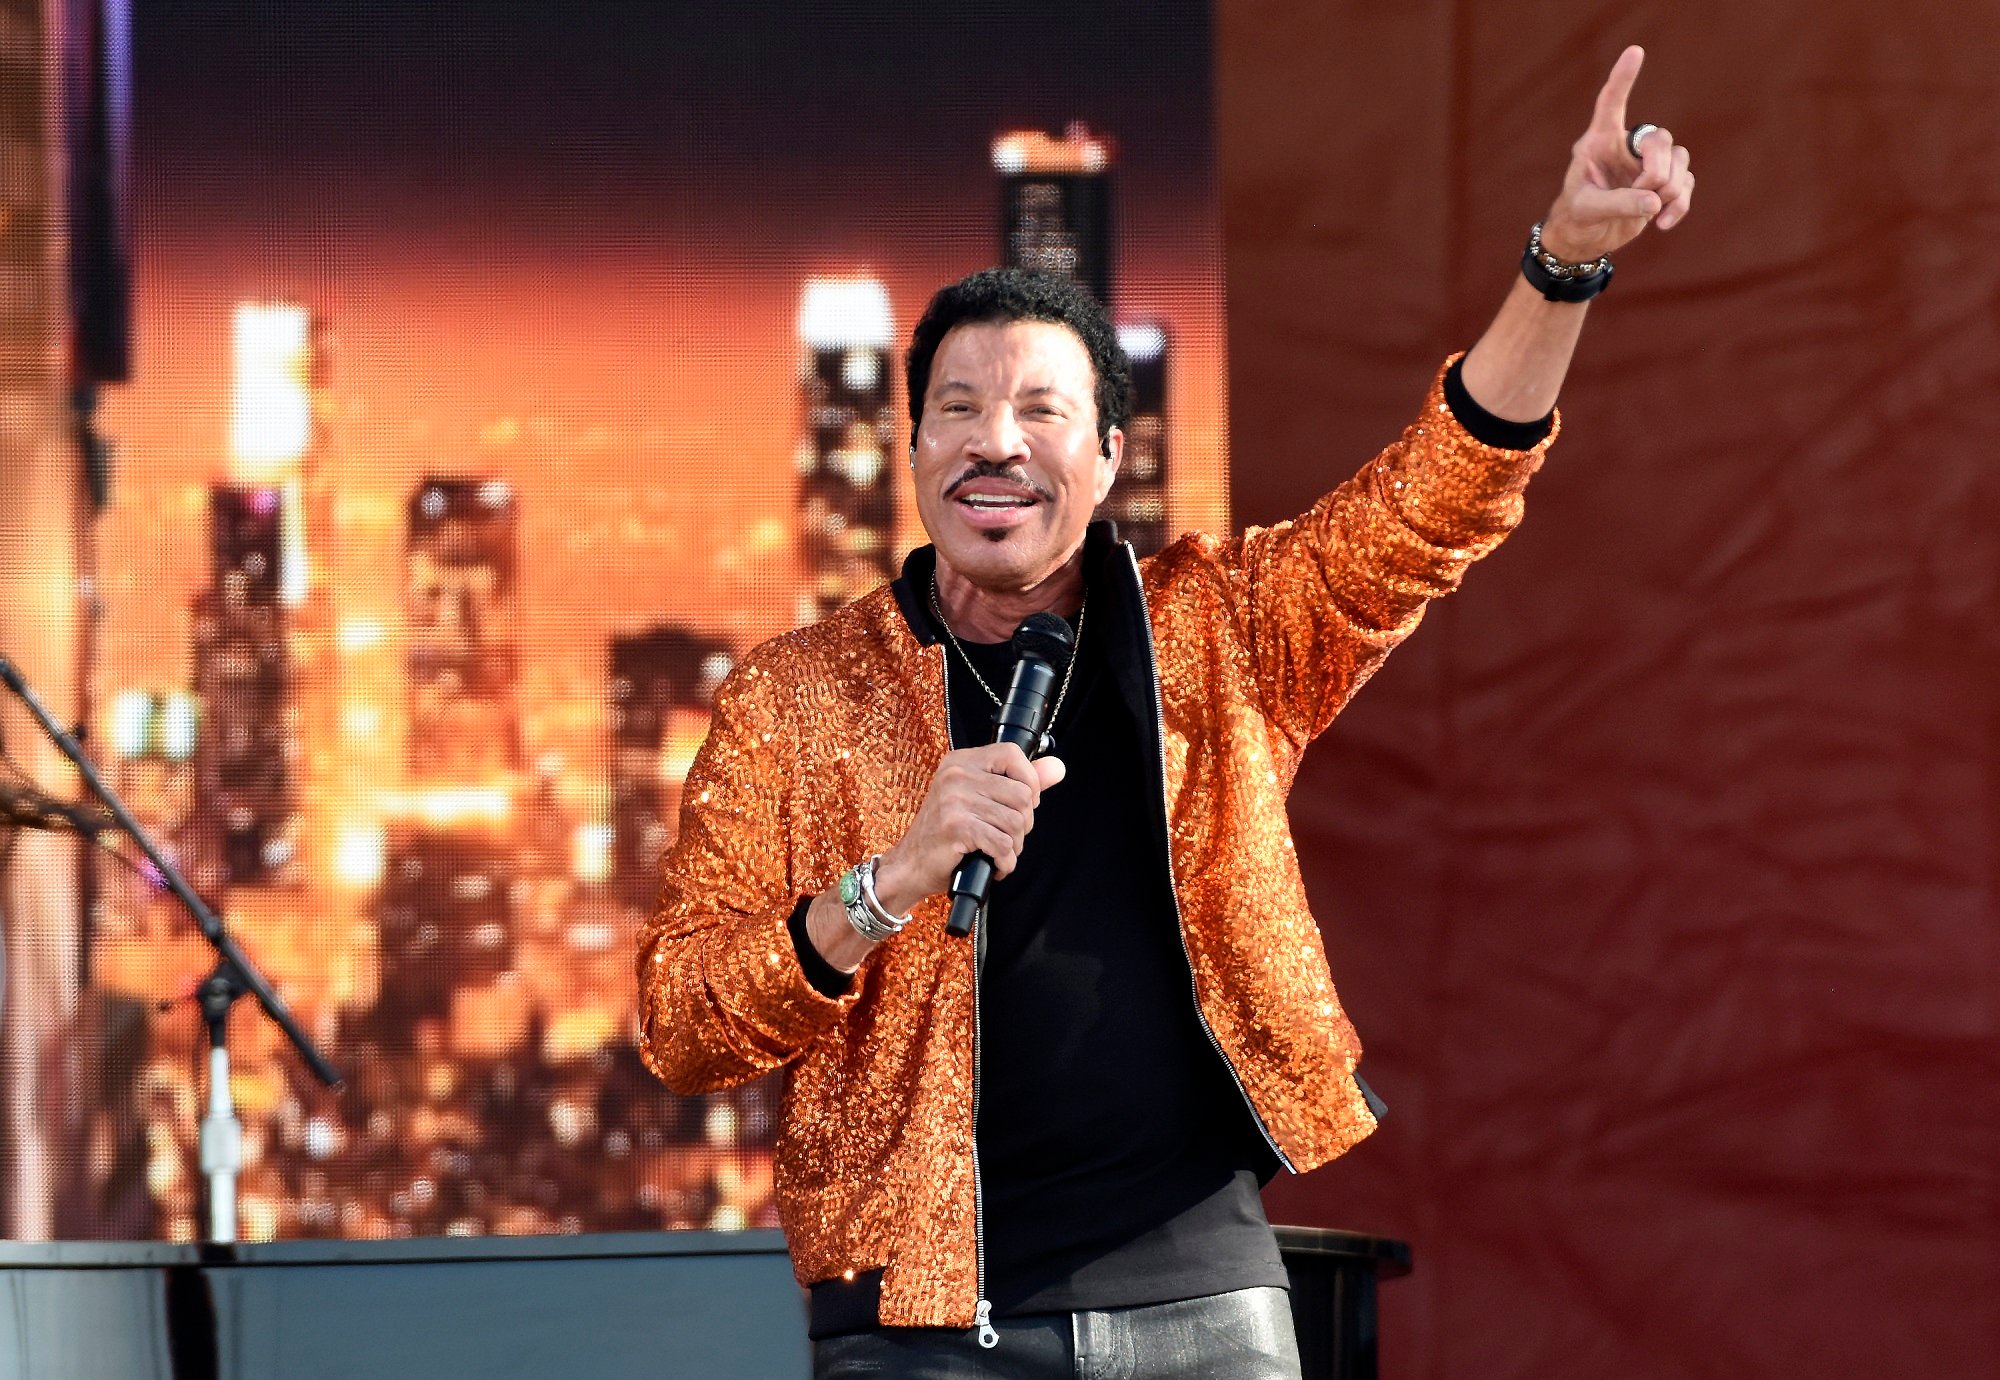 Lionel Richie stands on stage in an orange shimmery jacket